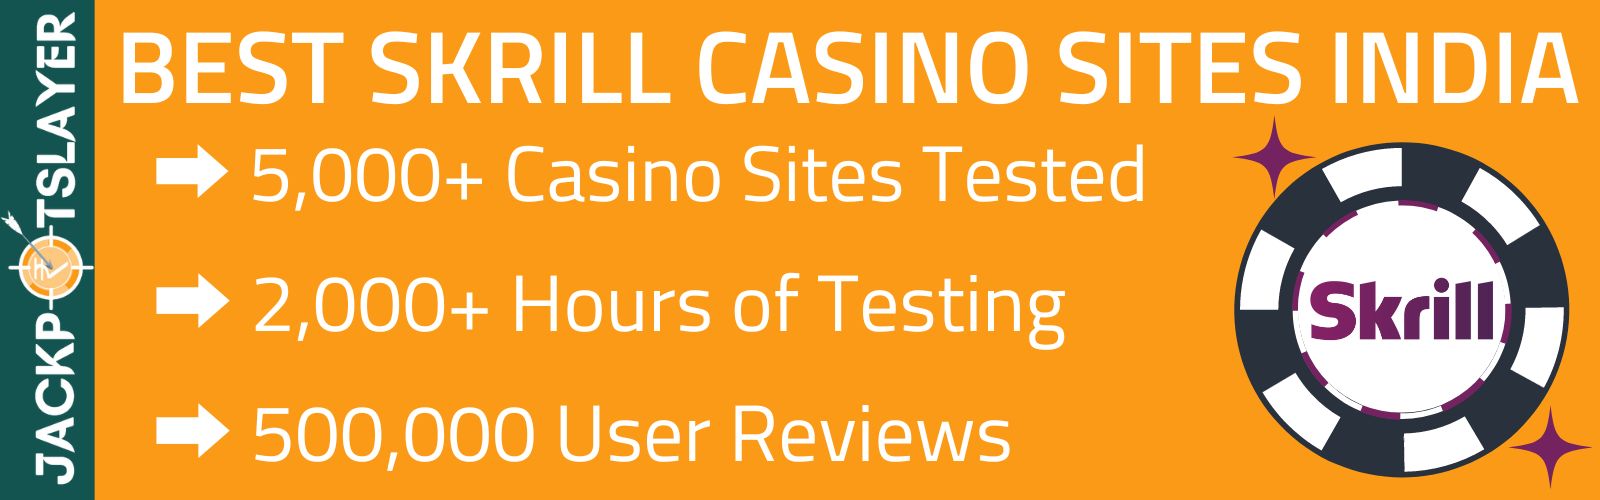 What Do You Want casino online To Become?